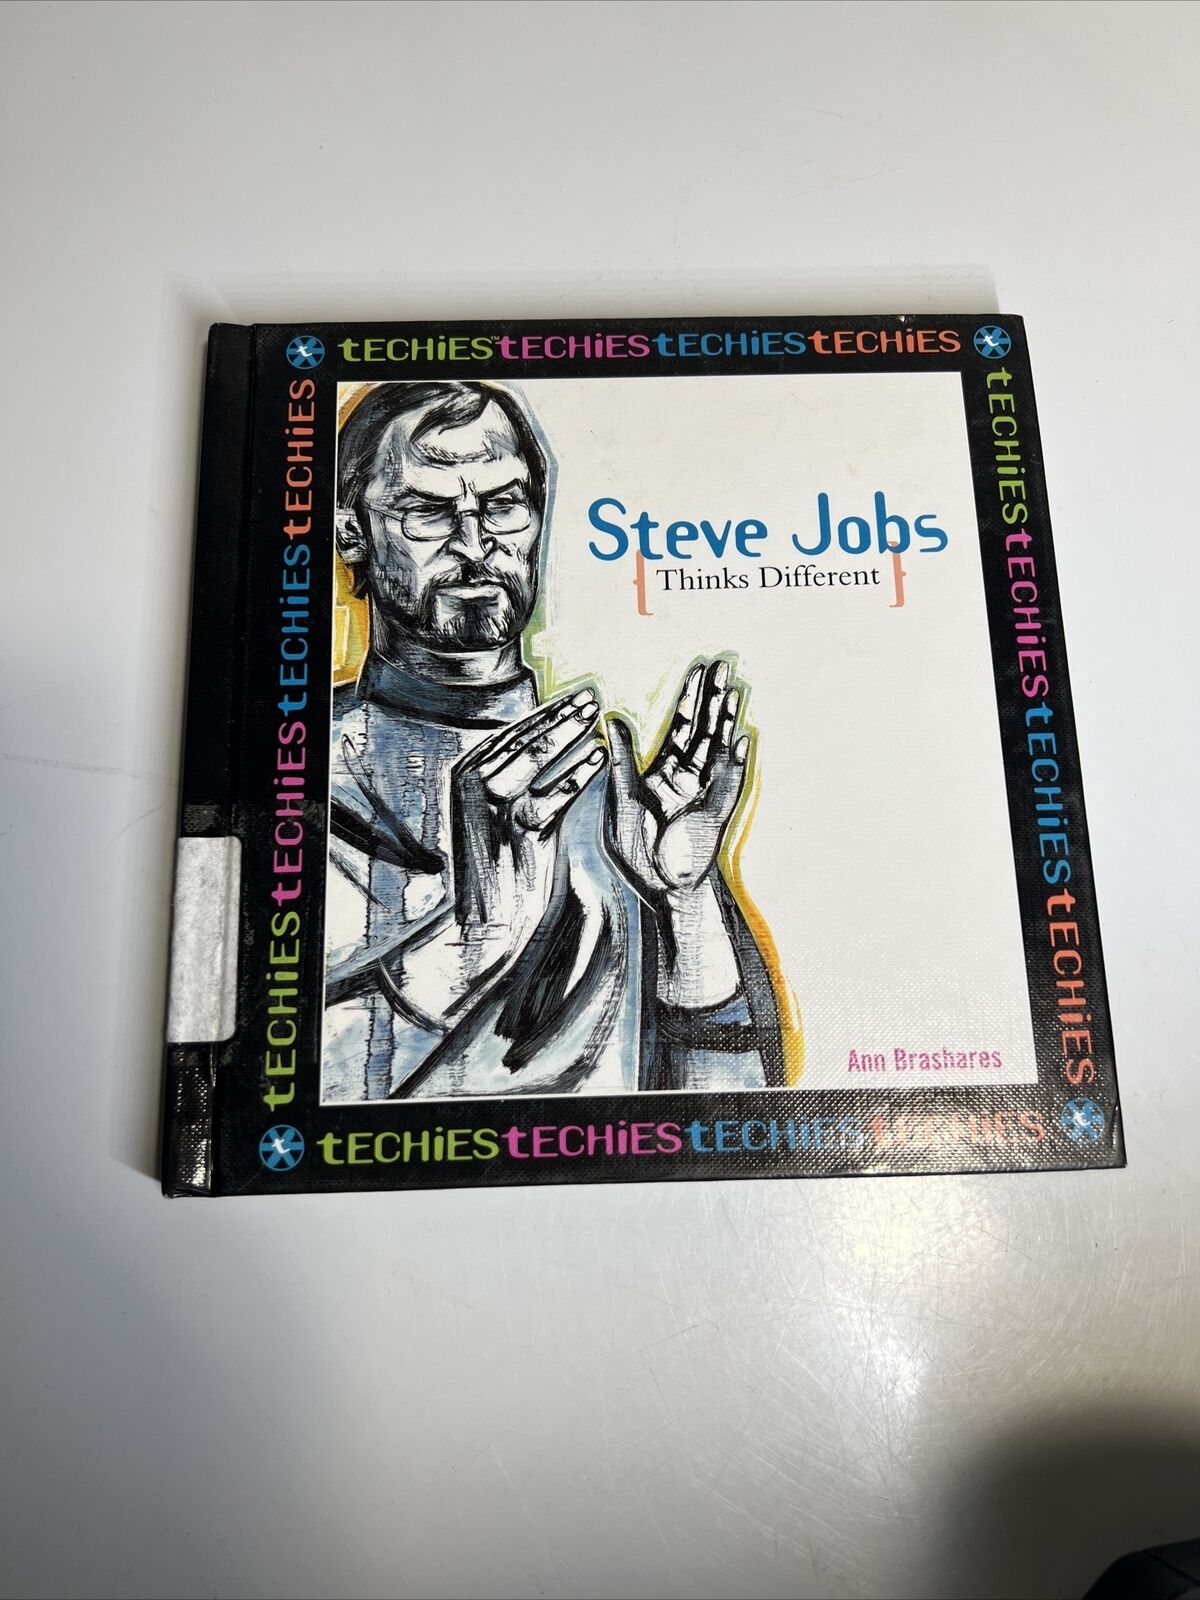 Steve Jobs: Thinks Different 2001 Book Summarizing His Early Achievements